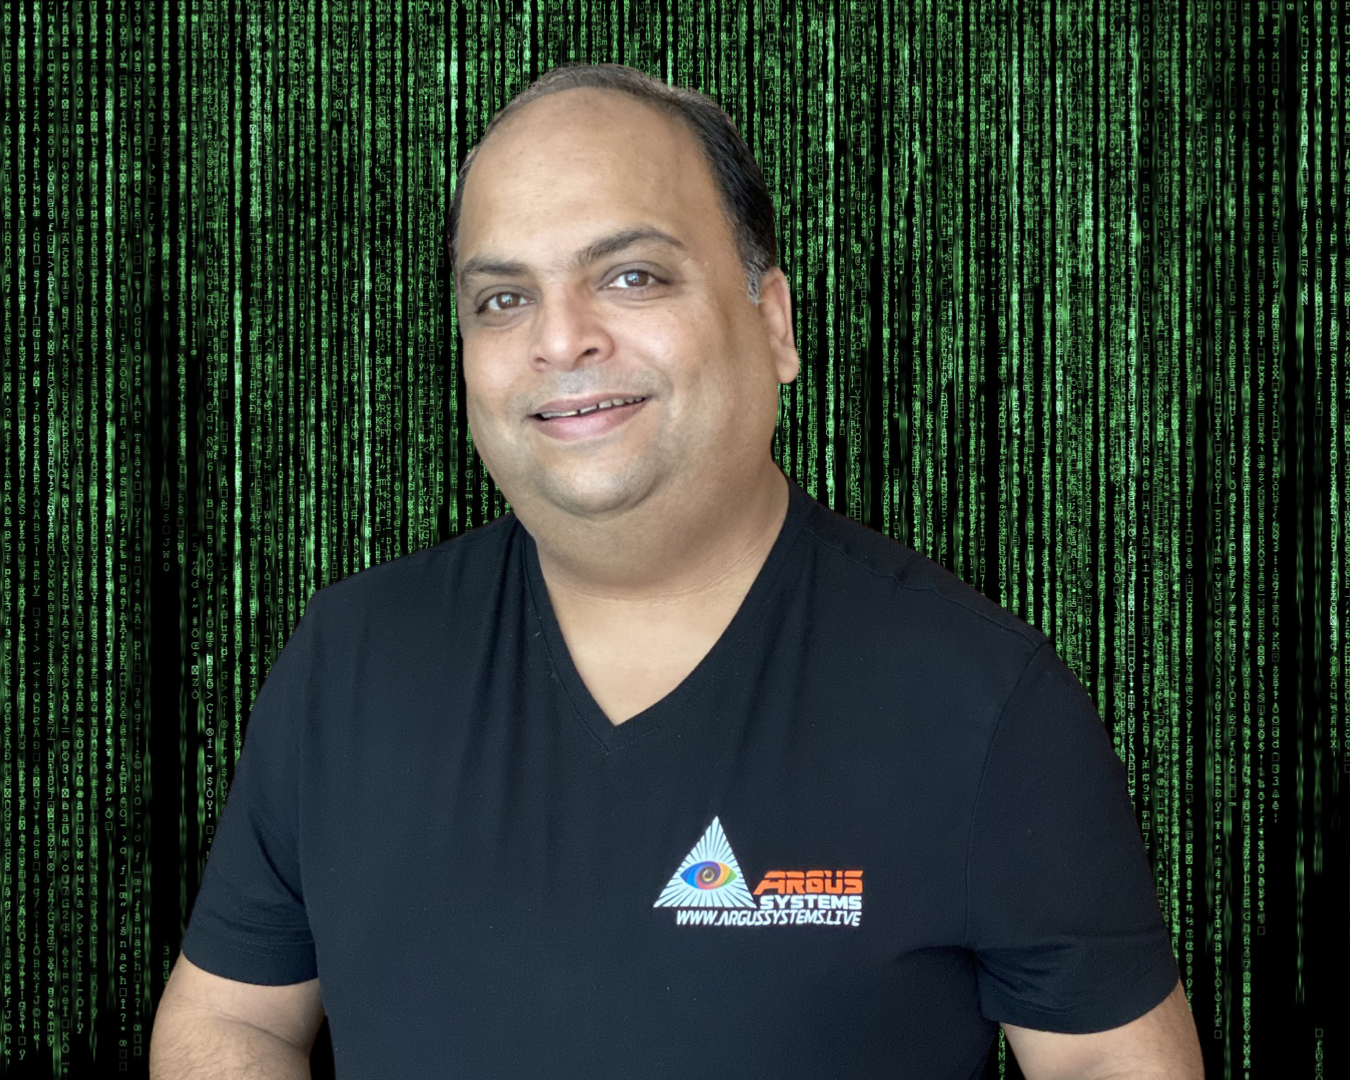 Rohit Khubchandani Chief Executive Officer Argus Systems